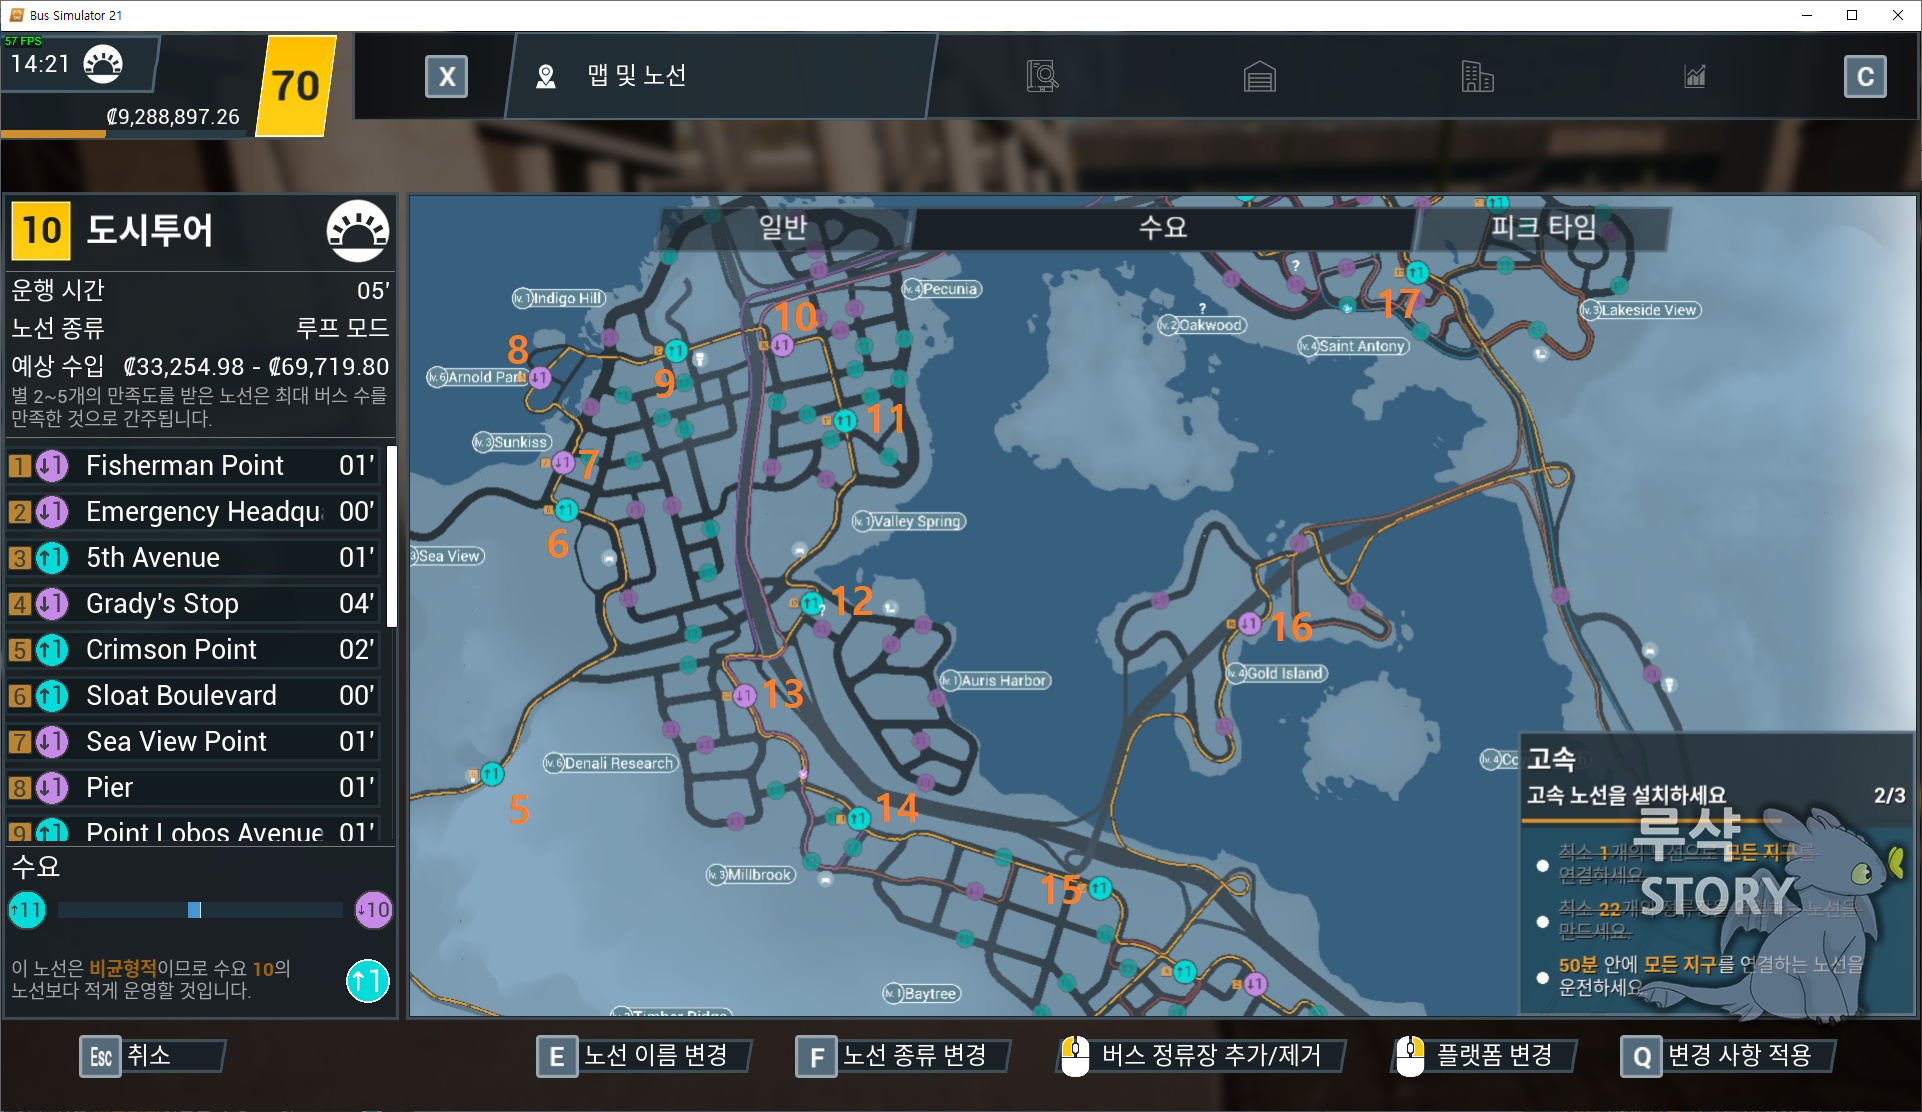 Bus Simulator 21 All Region Route With Photo - Map Guide - 1~21 - 158D085